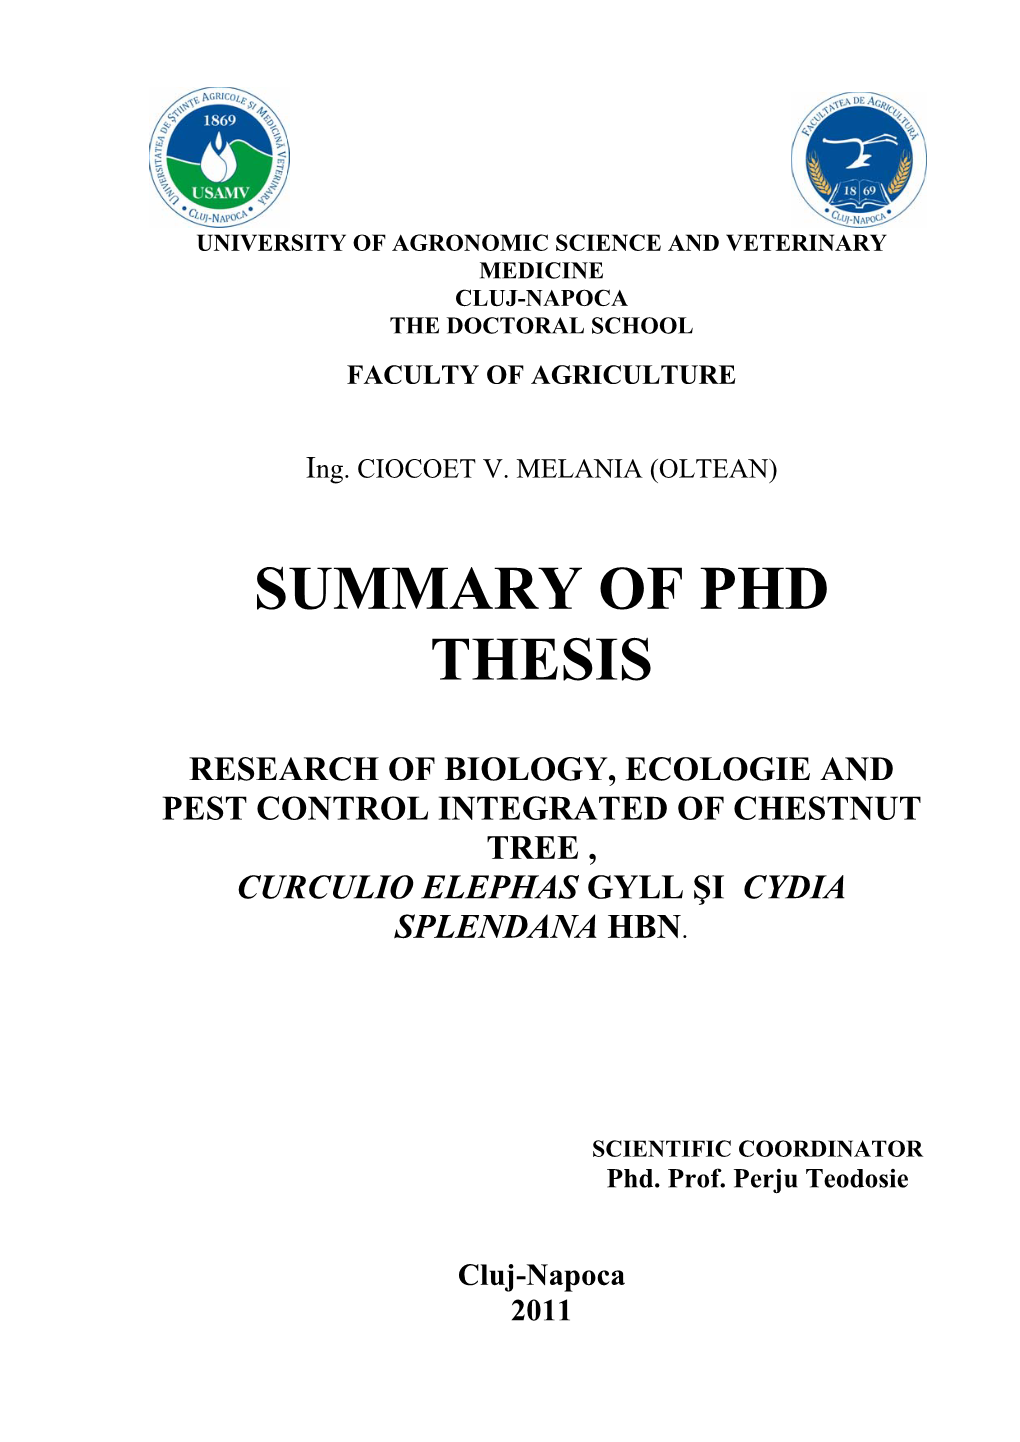 Summary of Phd Thesis Research of Biology